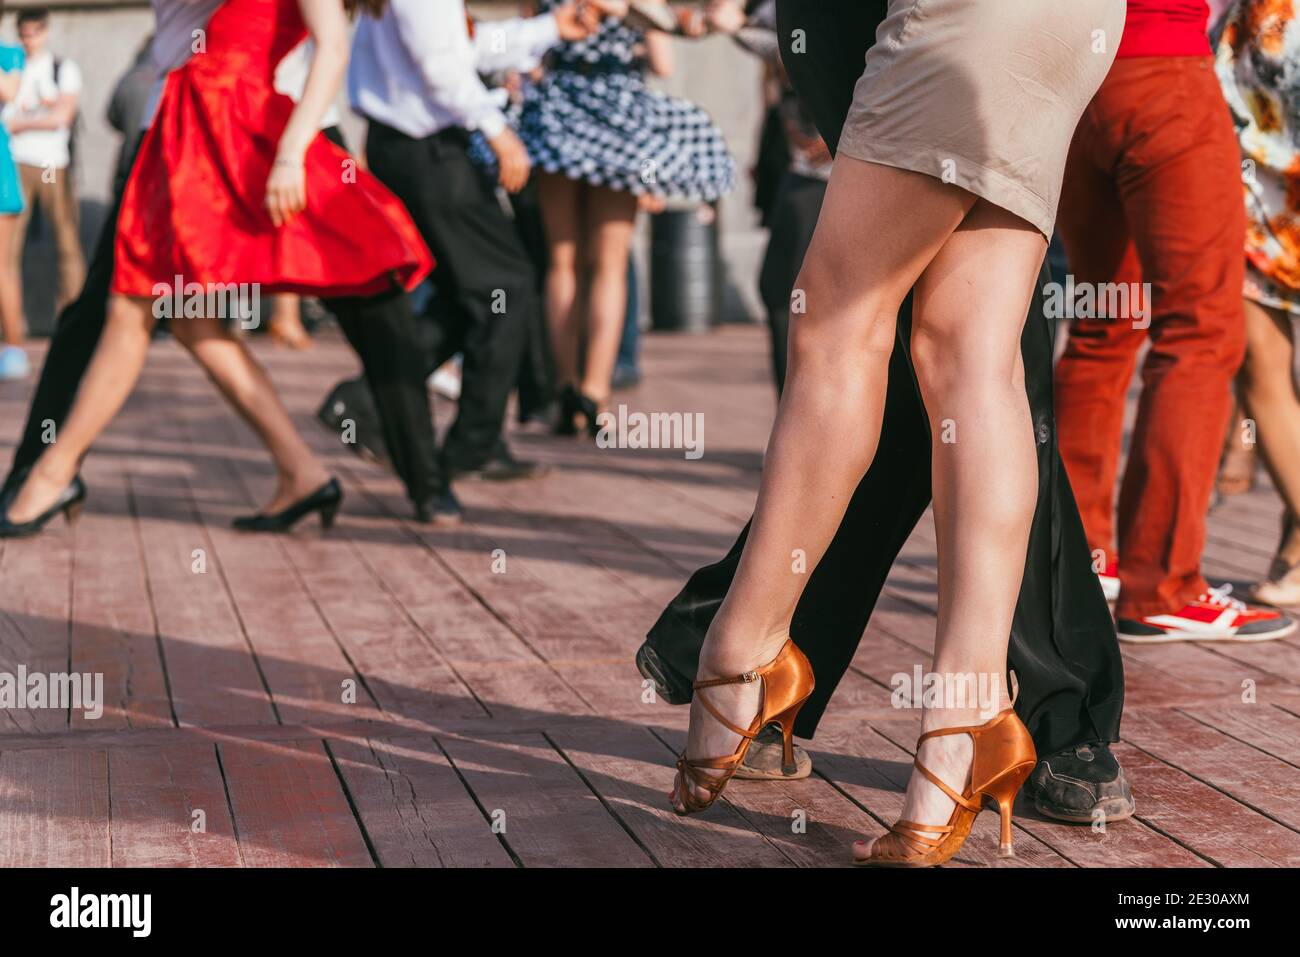 people are dancing outdoors in the park at sunny day. beautiful female feet in dancing shoes in the foreground and background and red skirt Stock Photo